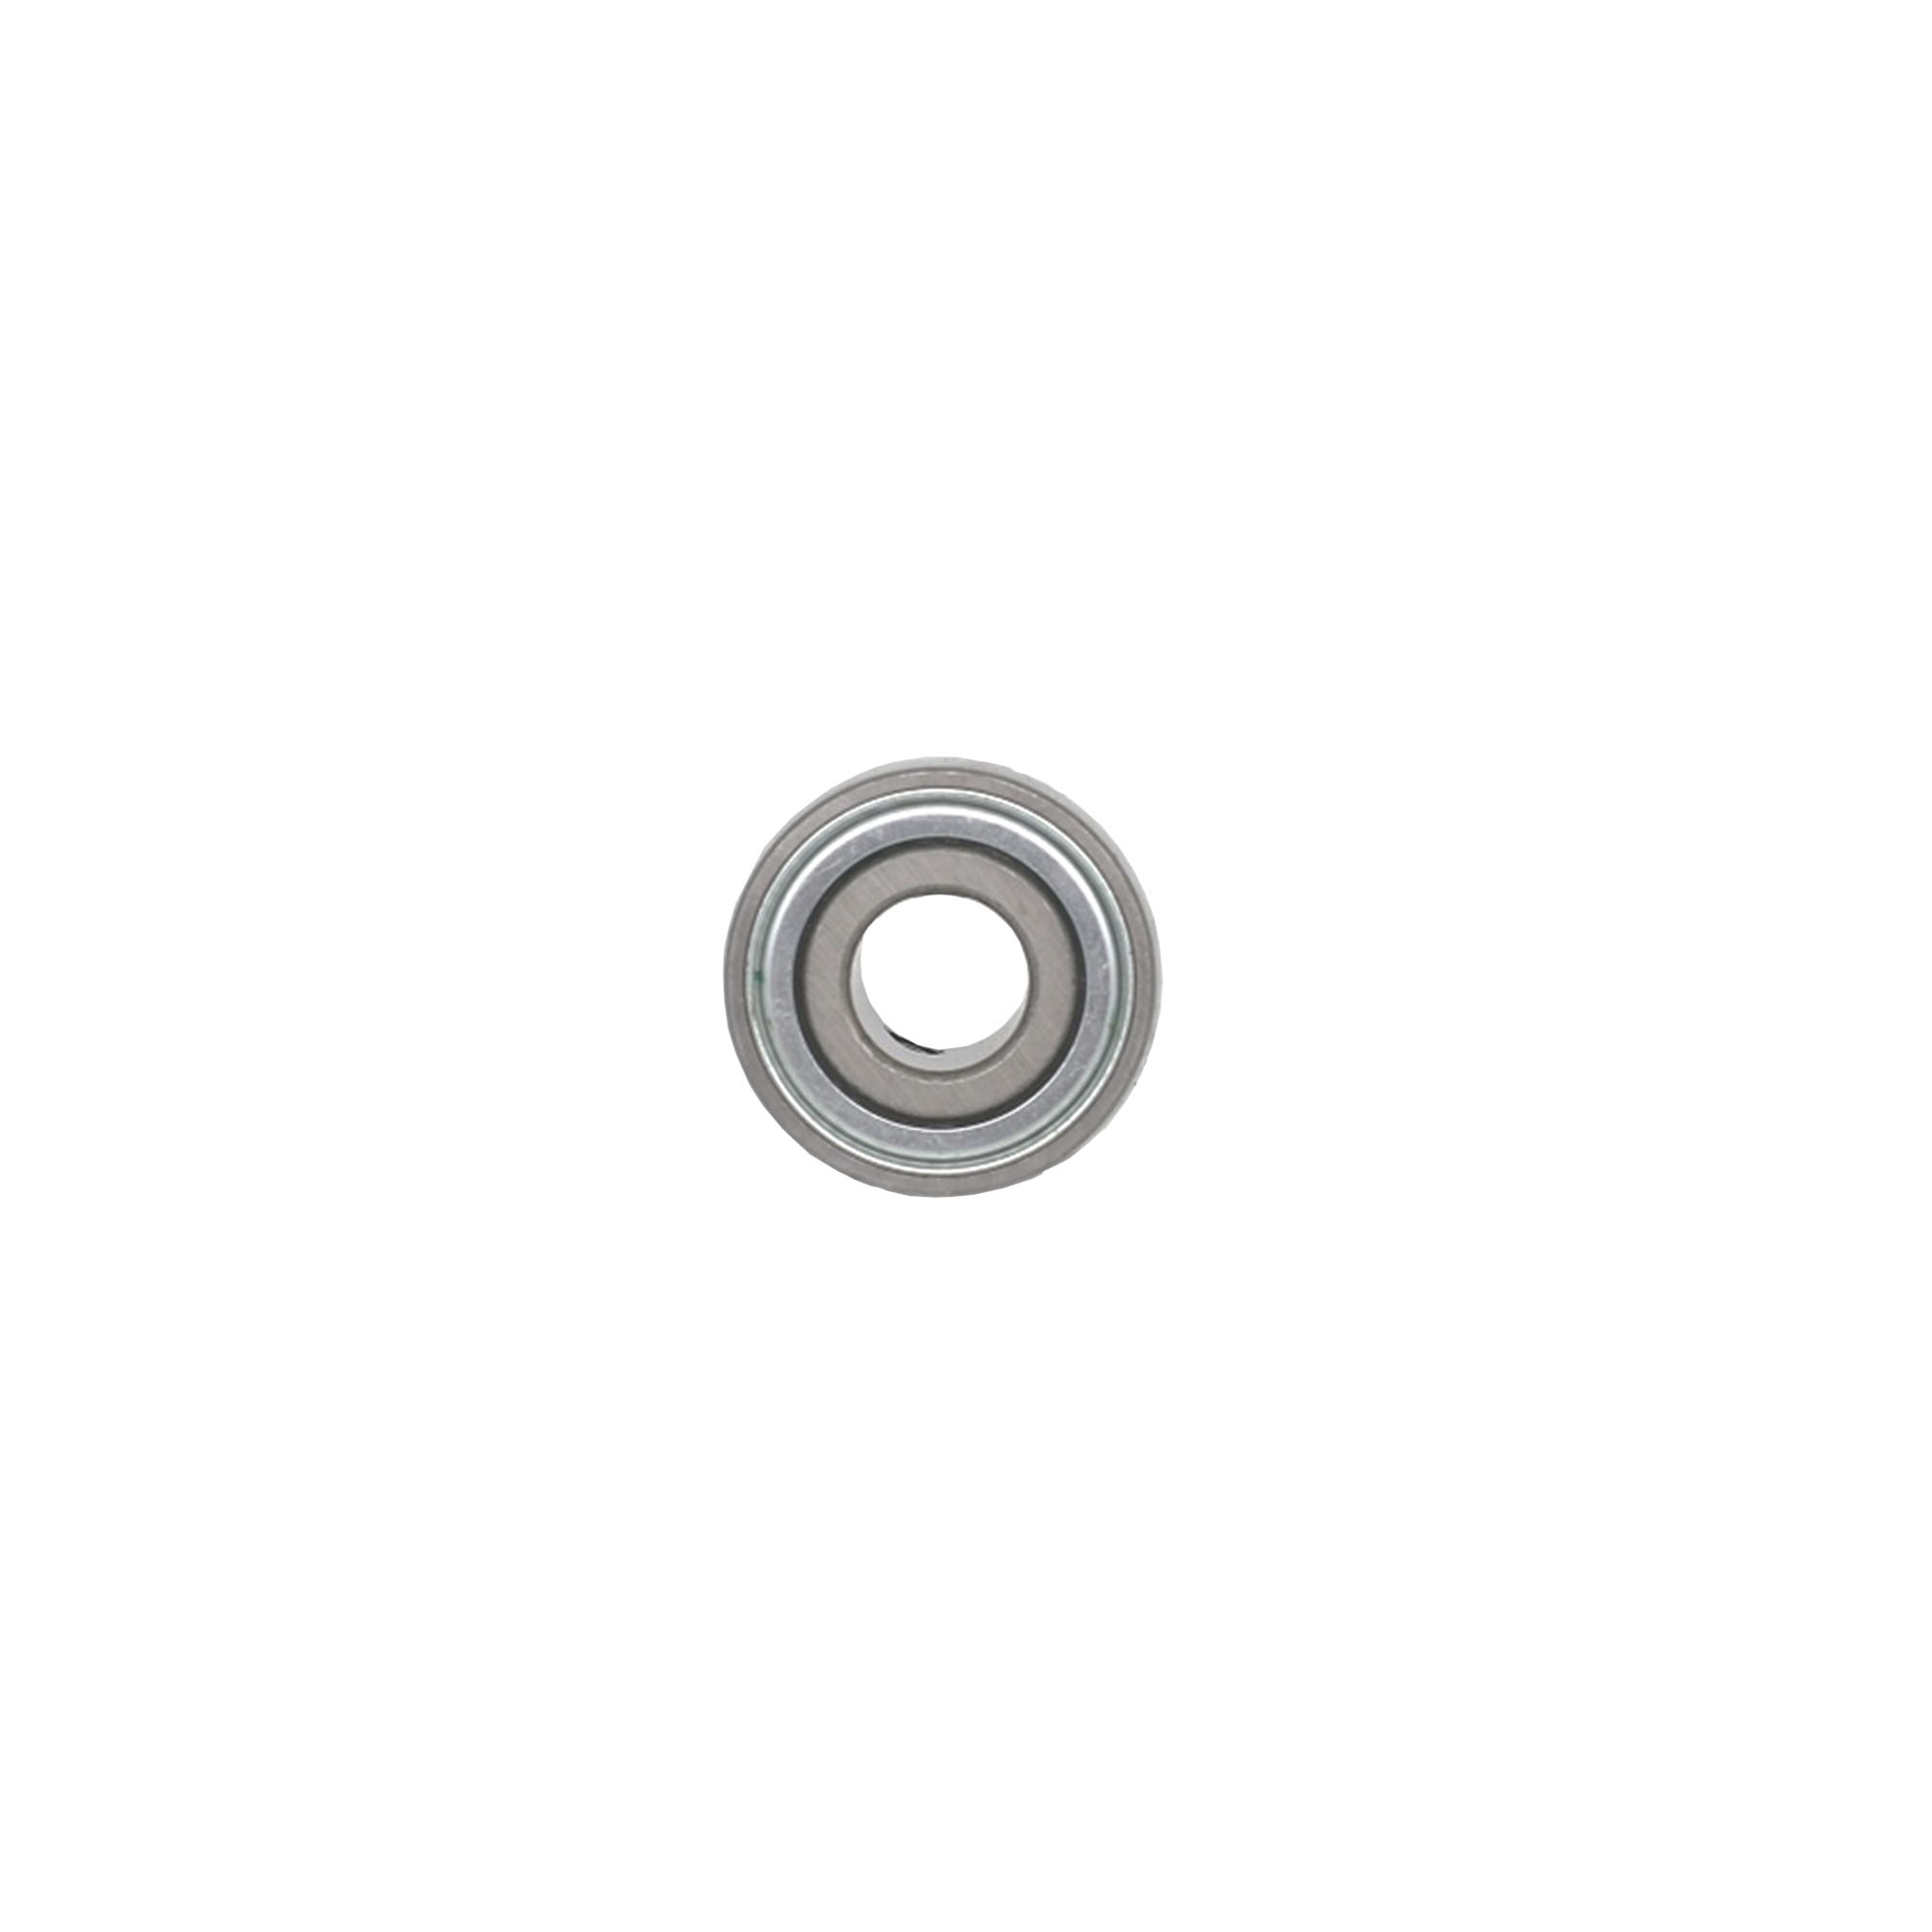 Parts Washer Replacement, Parts & Accessories, Bearing for Turntable Motor Shaft, 3602 Bearing, American Hawk Industrial, Dee-Blast